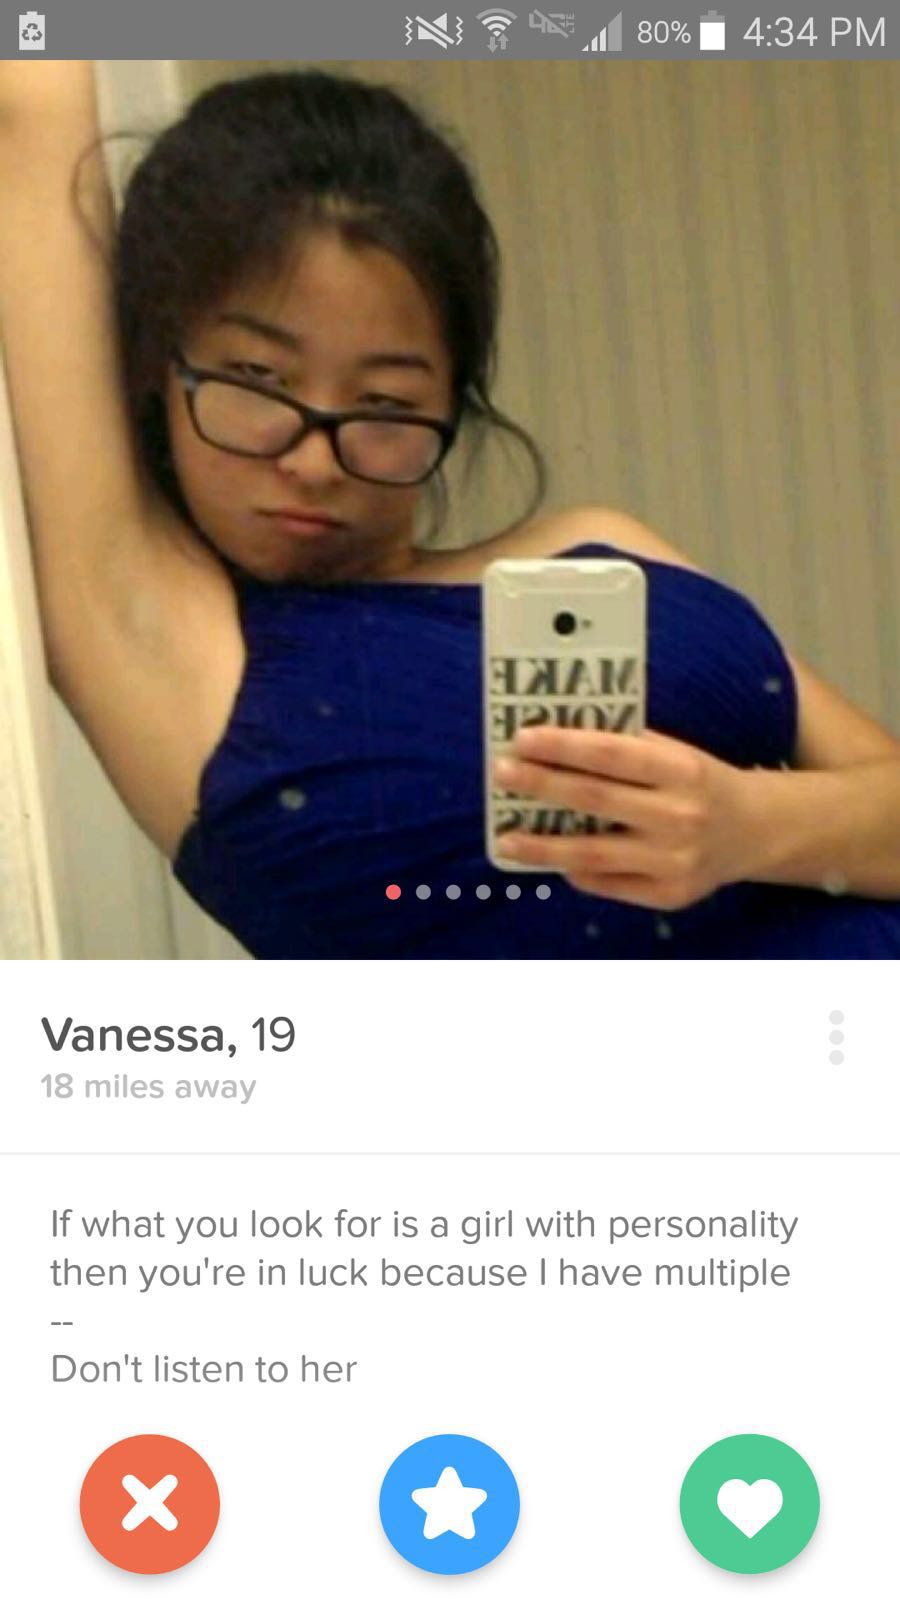 Funny multi-personality disorder girl on Tinder